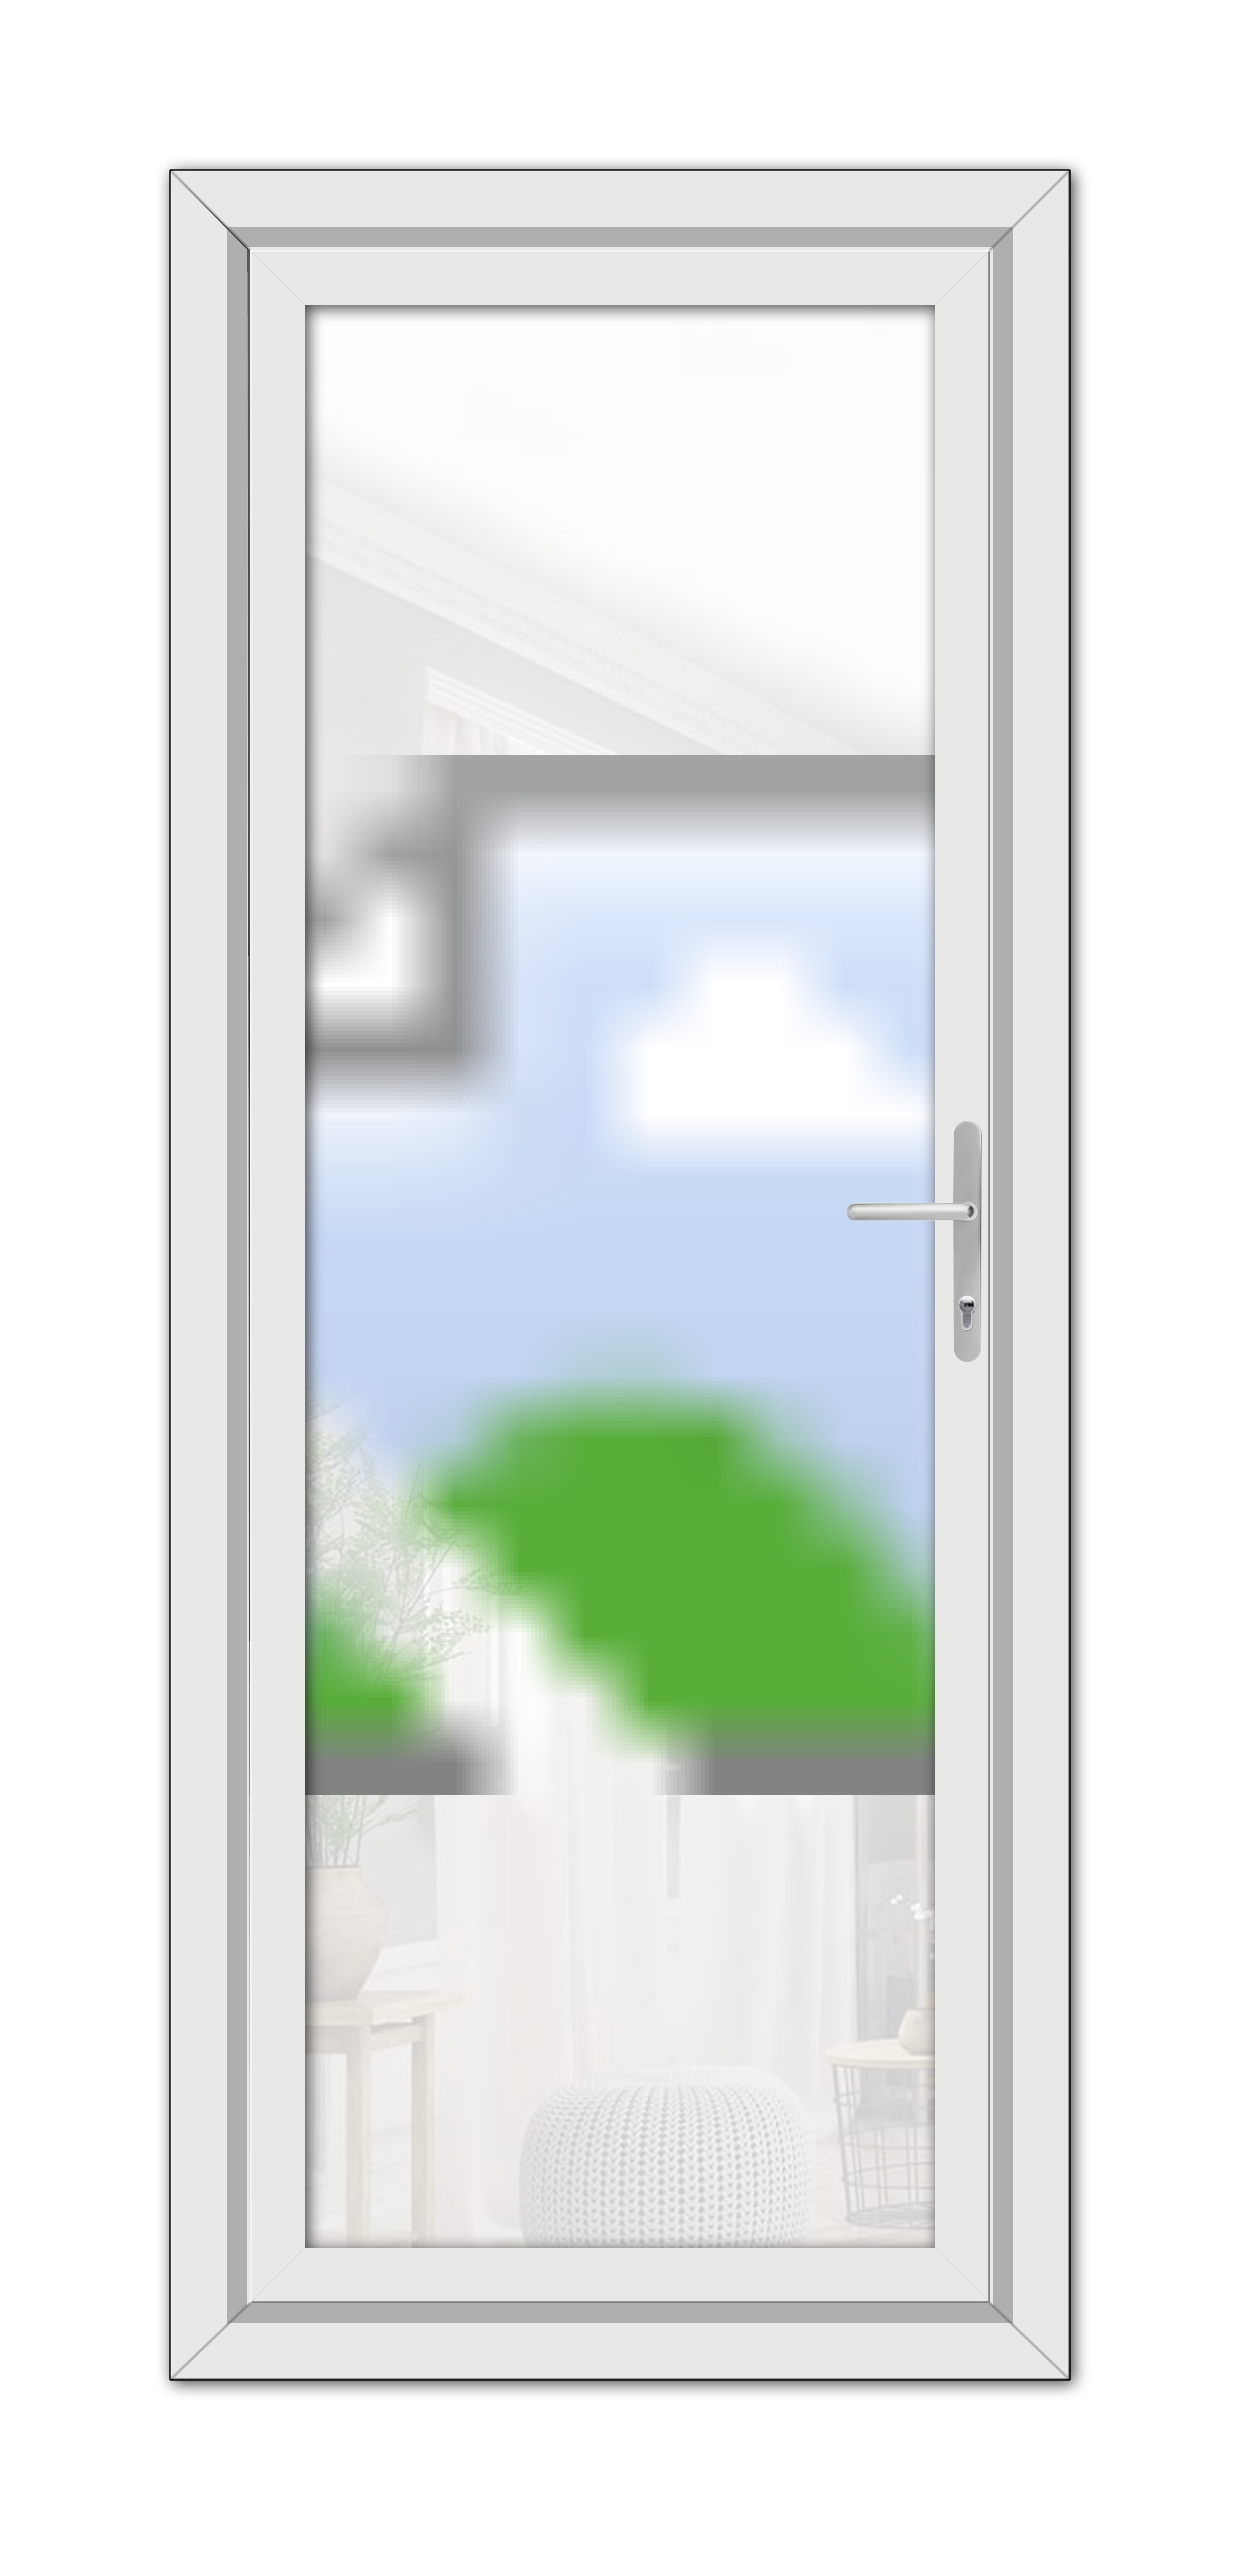 A modern Grey Alnwick One Solid uPVC Door with a clear view, showing a blurred outdoor scene with hints of greenery and blue sky.